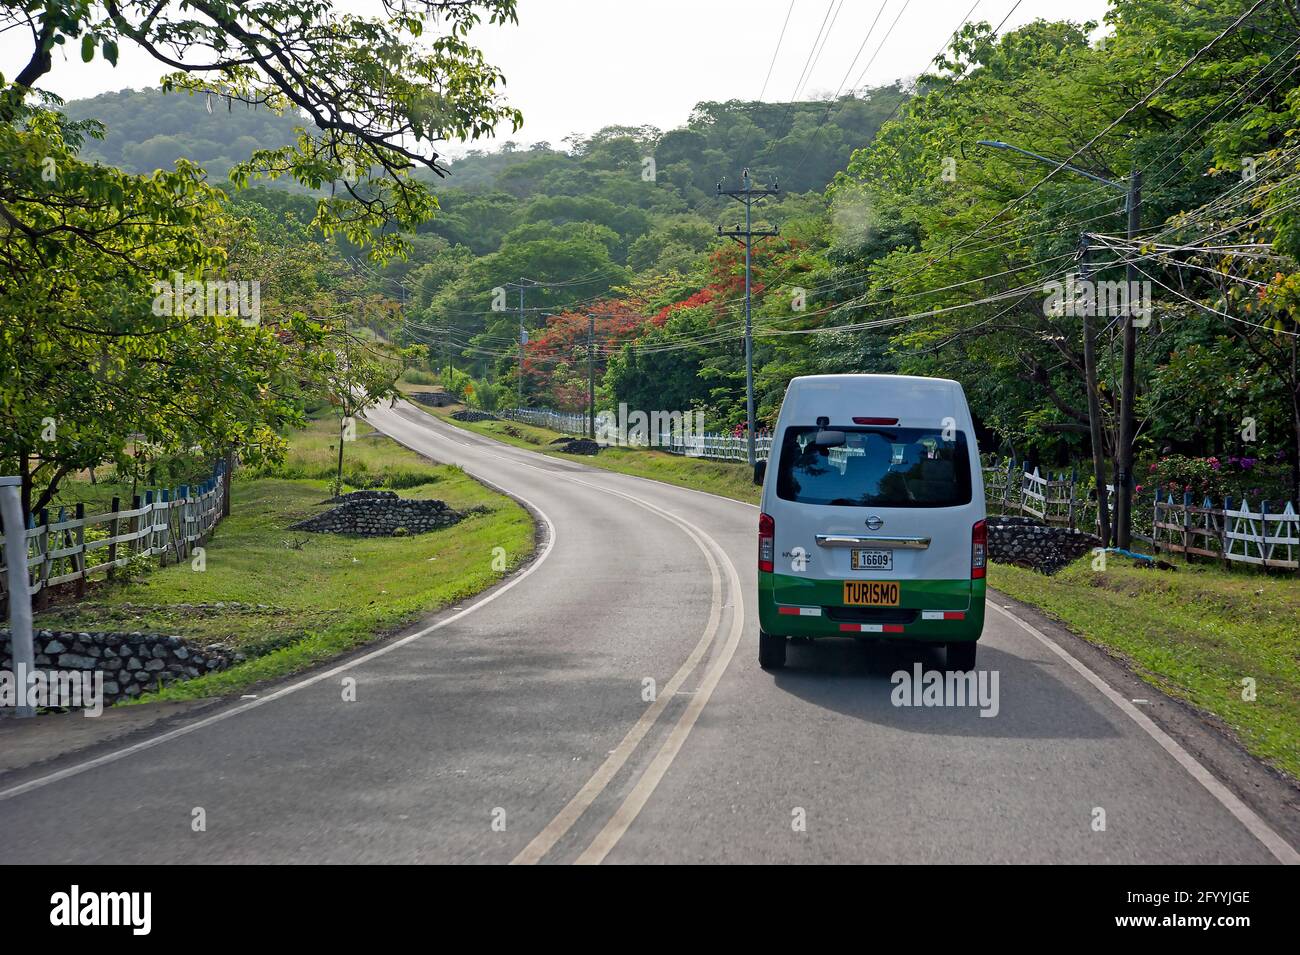 Tourist vehicle driving on Road in Costa Rica Stock Photo